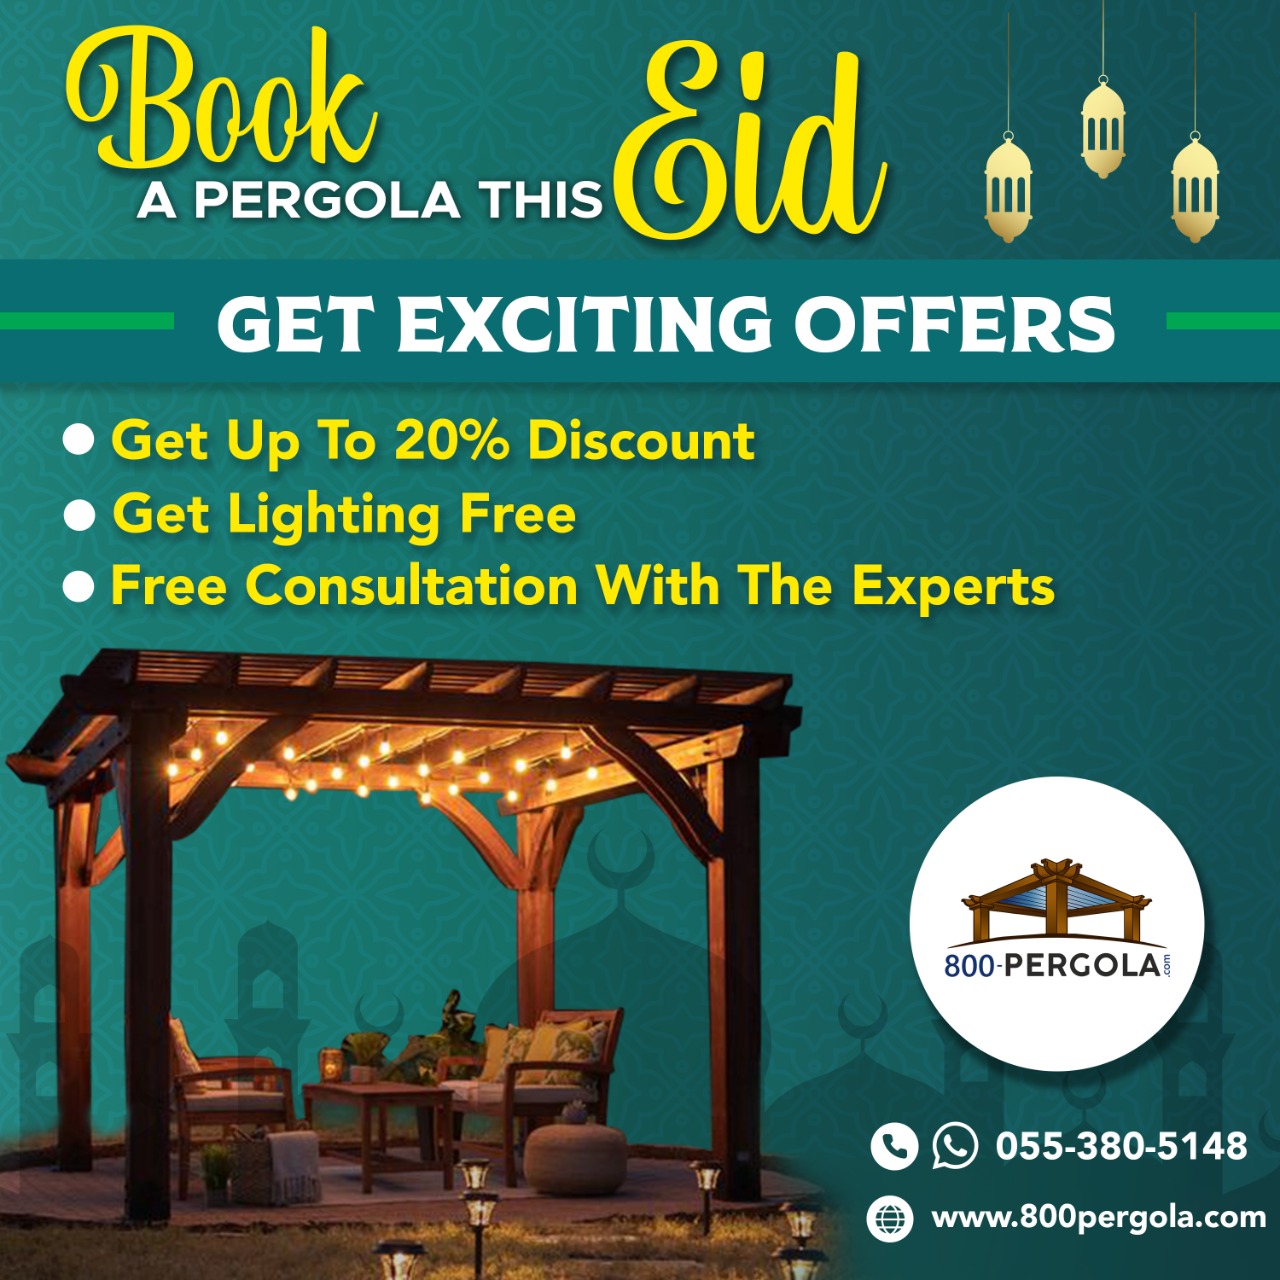 This EID, Bring Beauty to Your Backyard with a Stunning Pergola from 800 PERGOLA